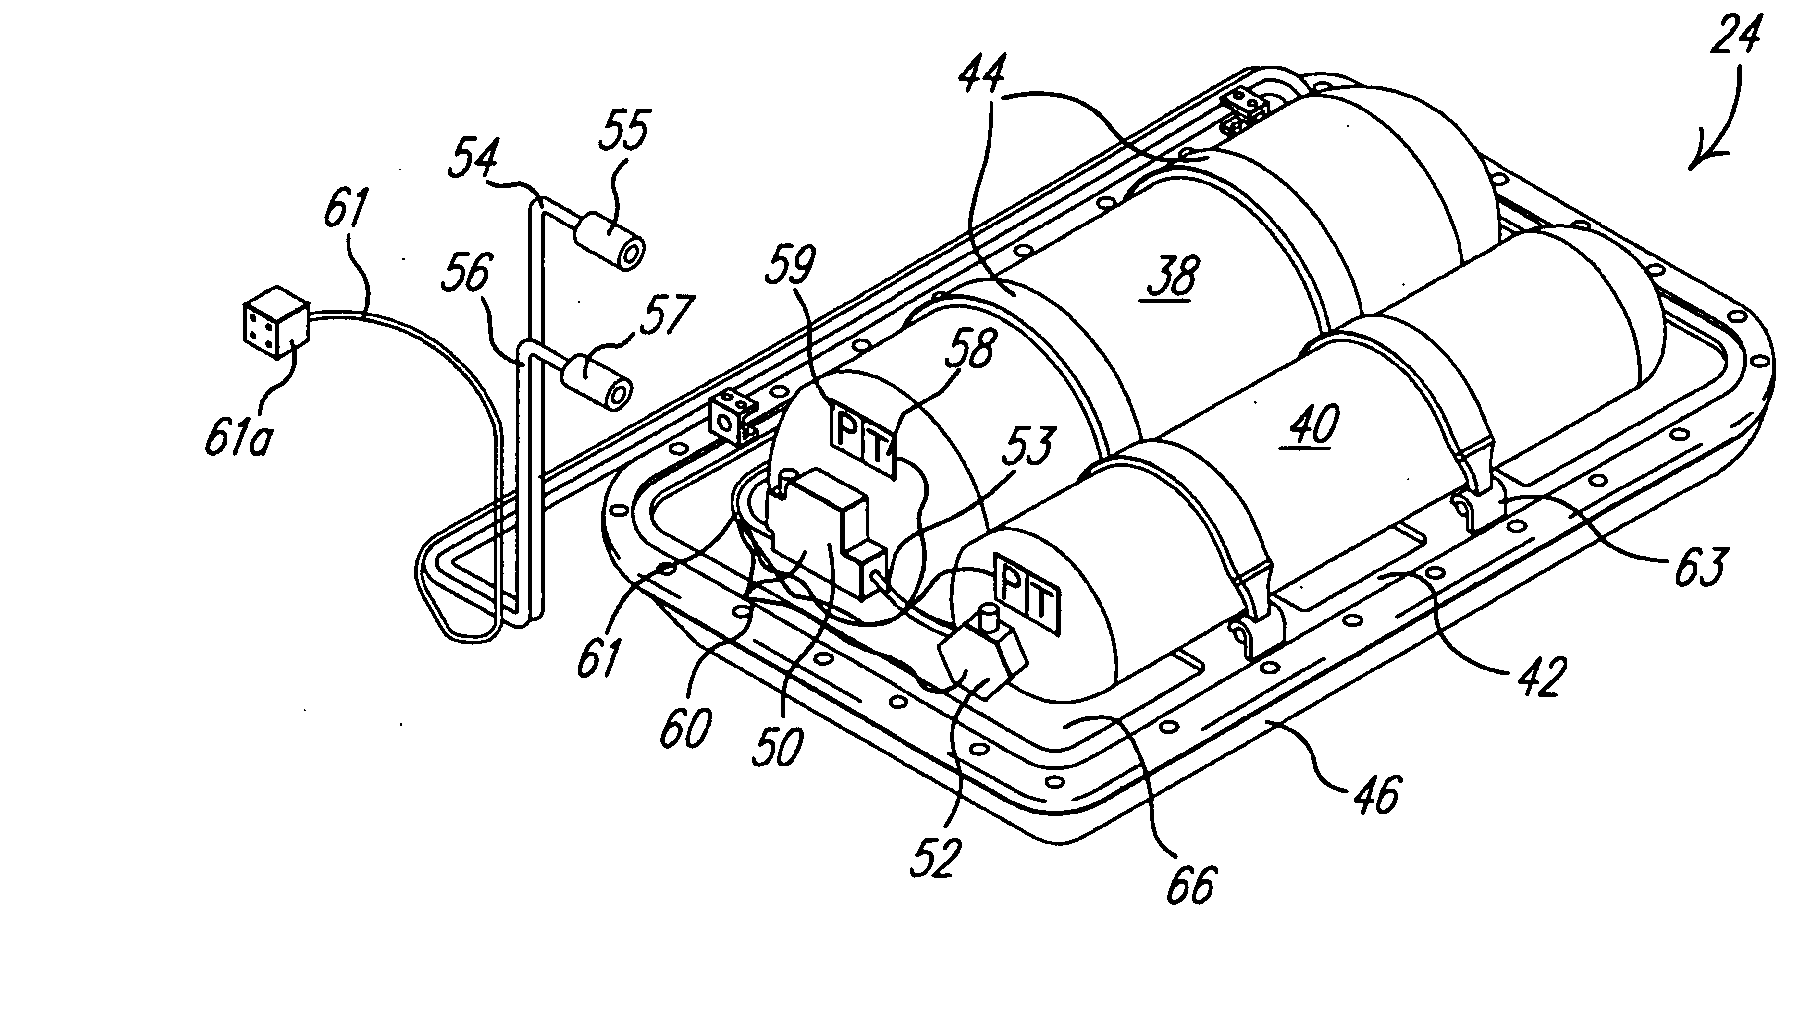 Modular fuel storage system for a vehicle